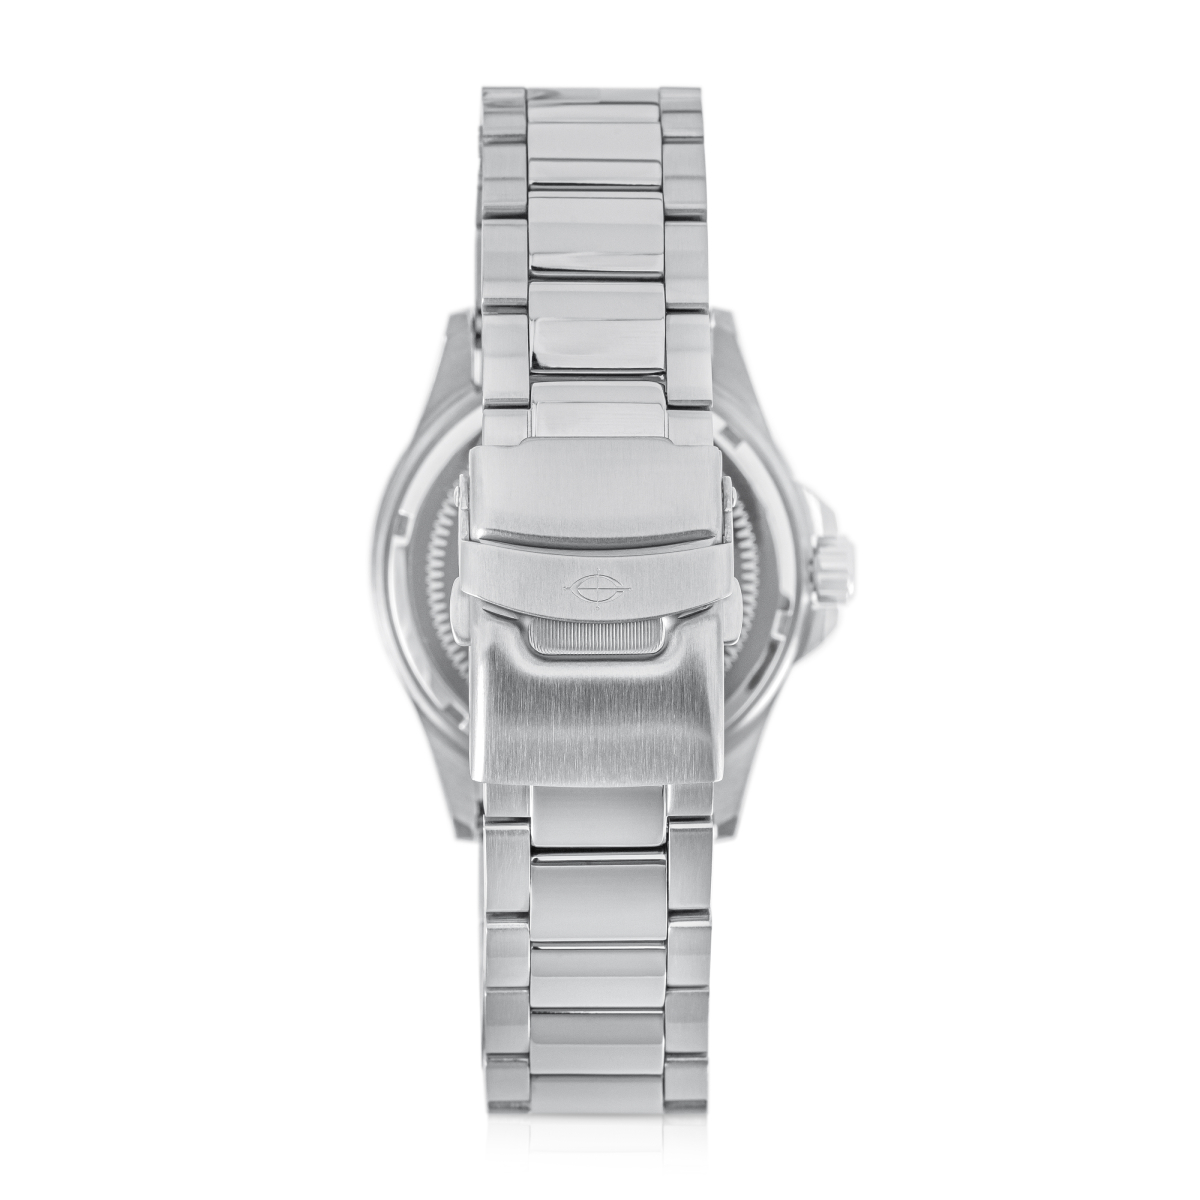 Continental Gents Sports Watch 20504-GD101430 - back view